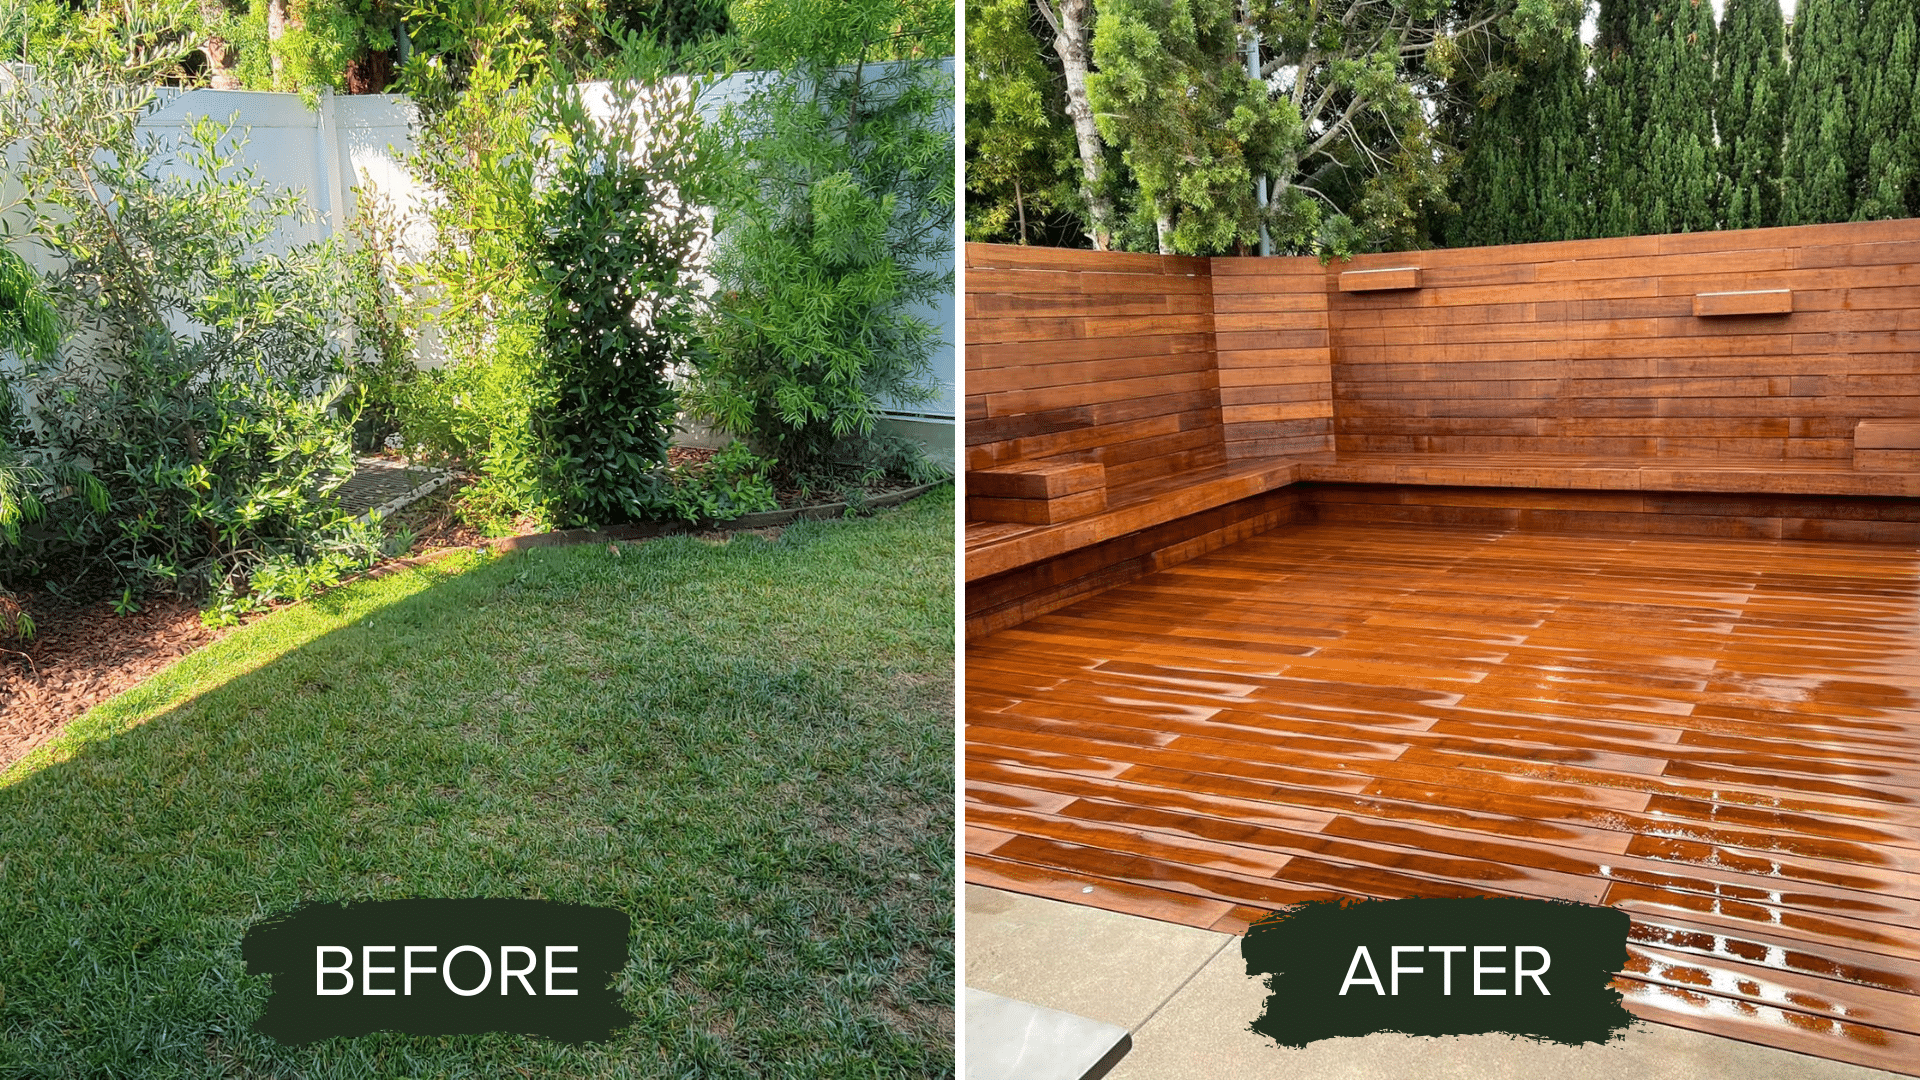 BEFORE AFTER DECK BUILDING